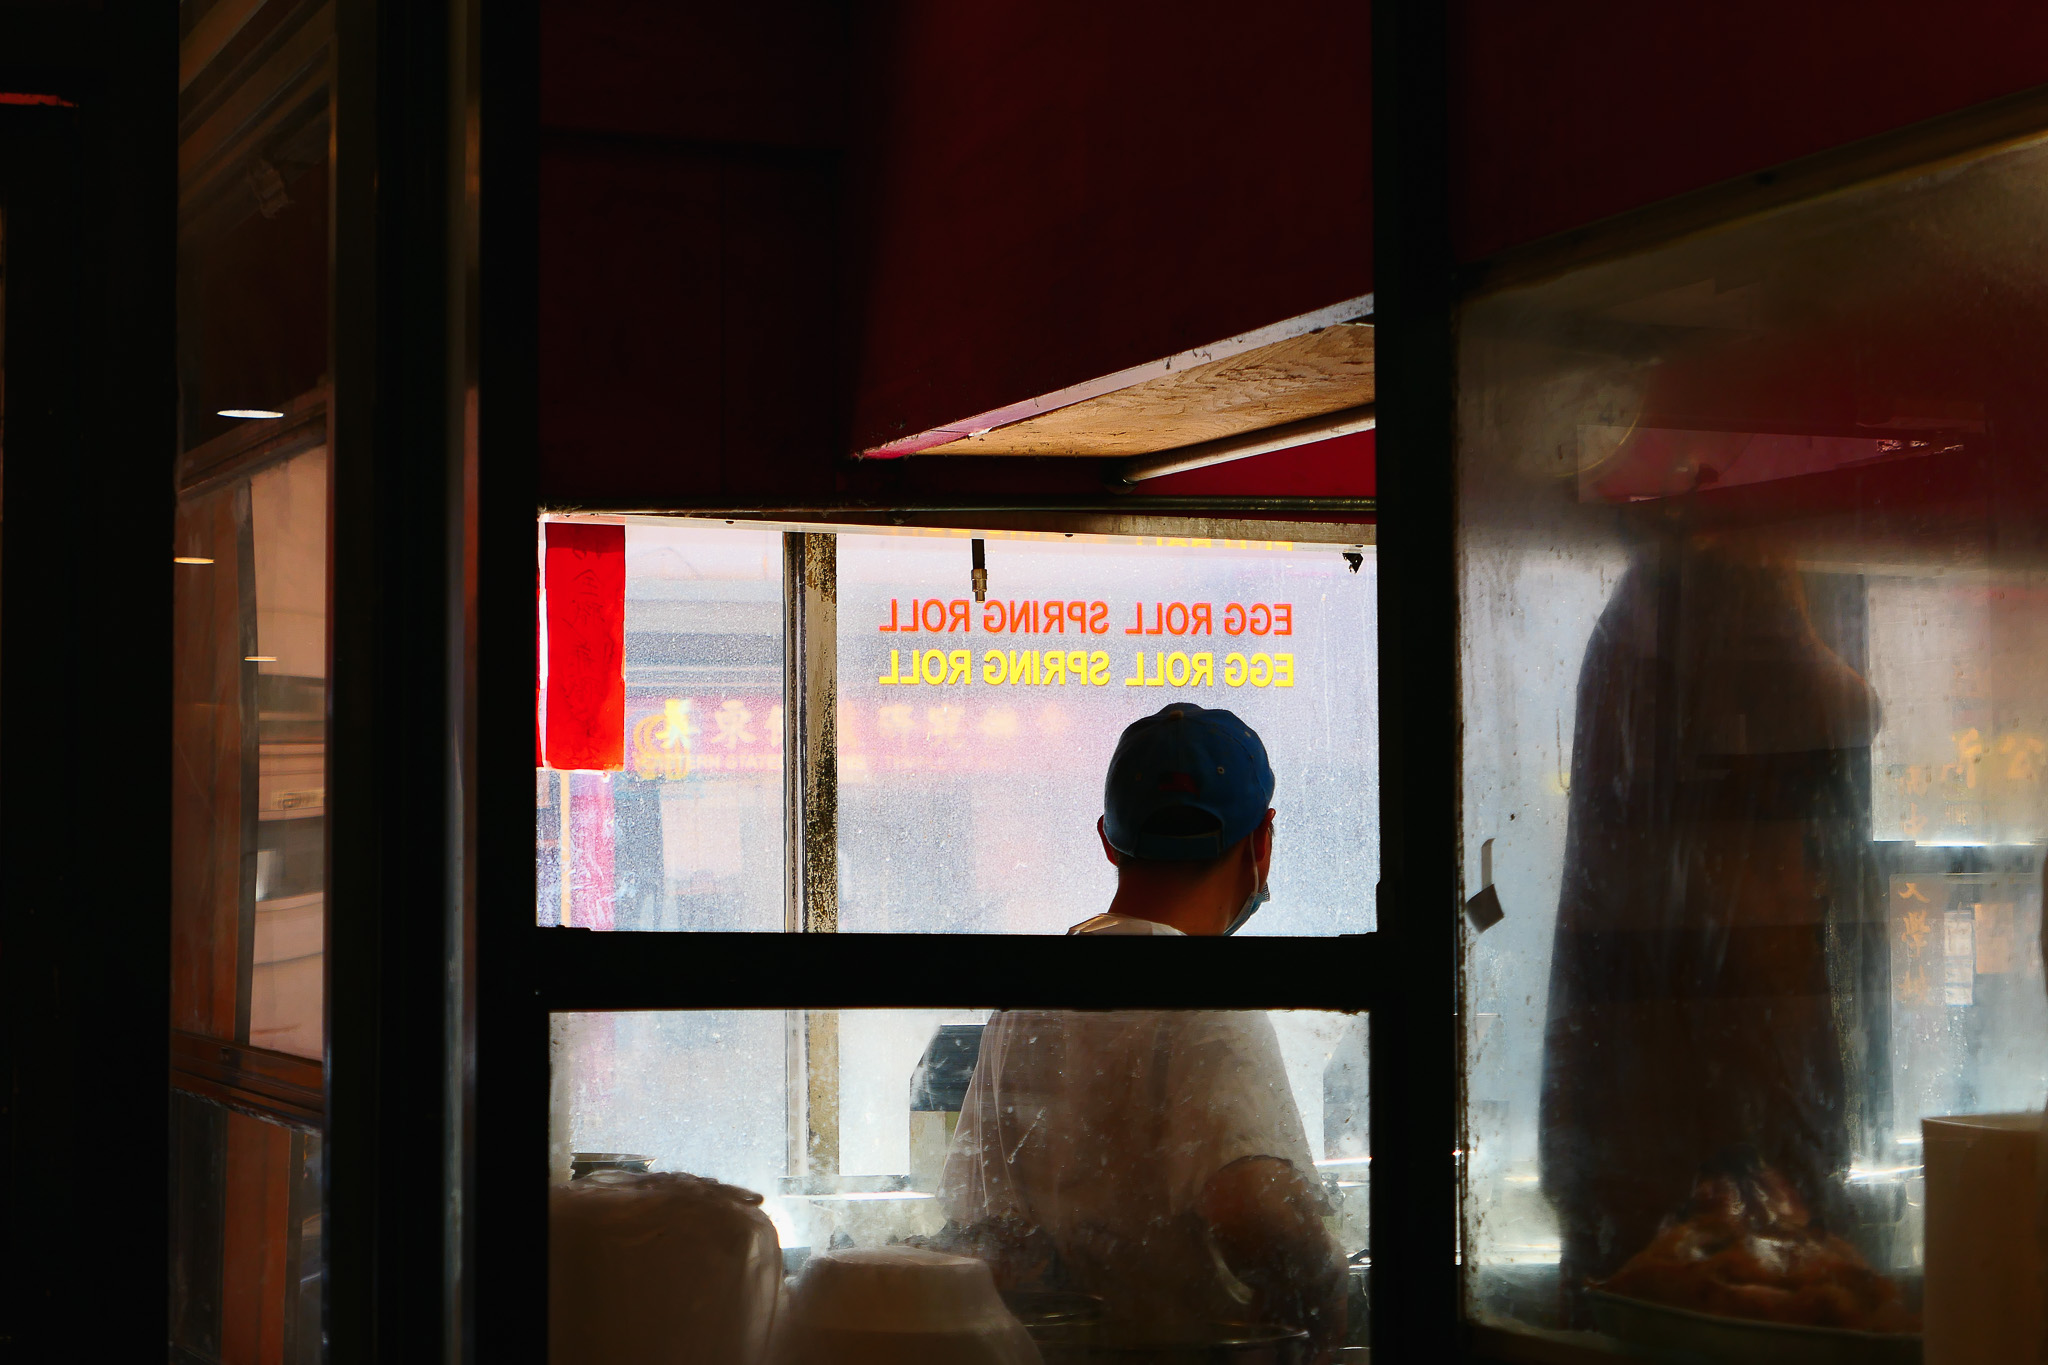 Backlit restaurant worker looks out the window, which has 'egg roll spring roll' lettered on it